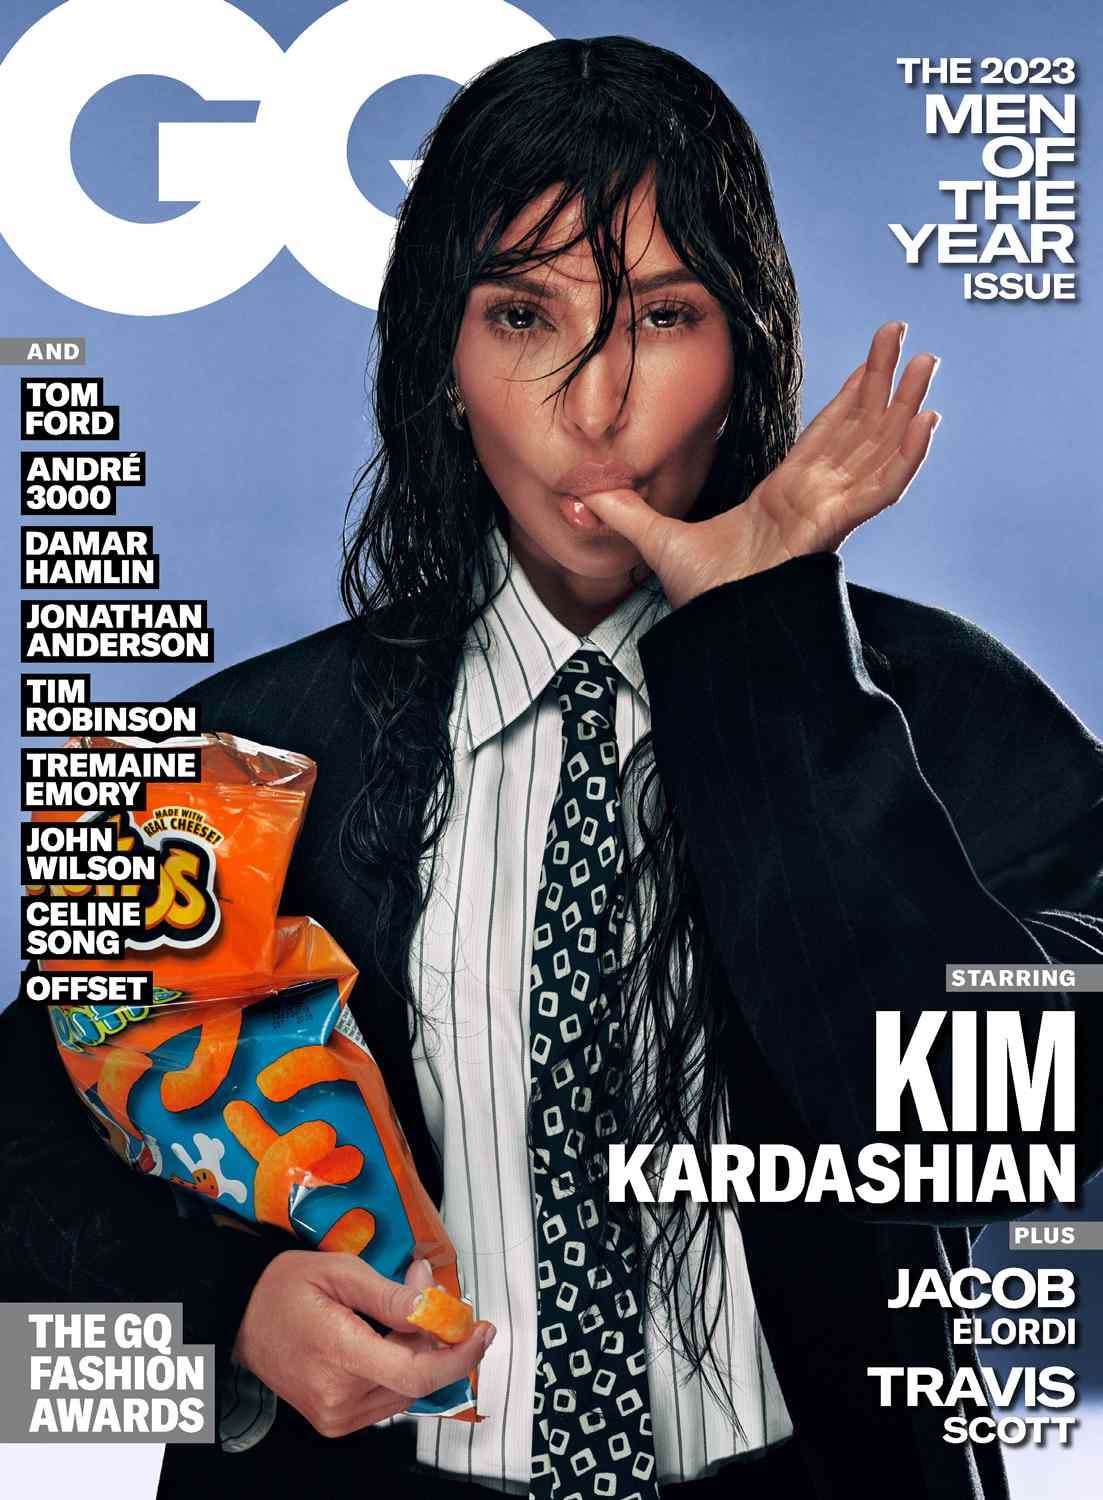 Kim Kardashian Is Named One of GQ's Men of the Year Cover Stars